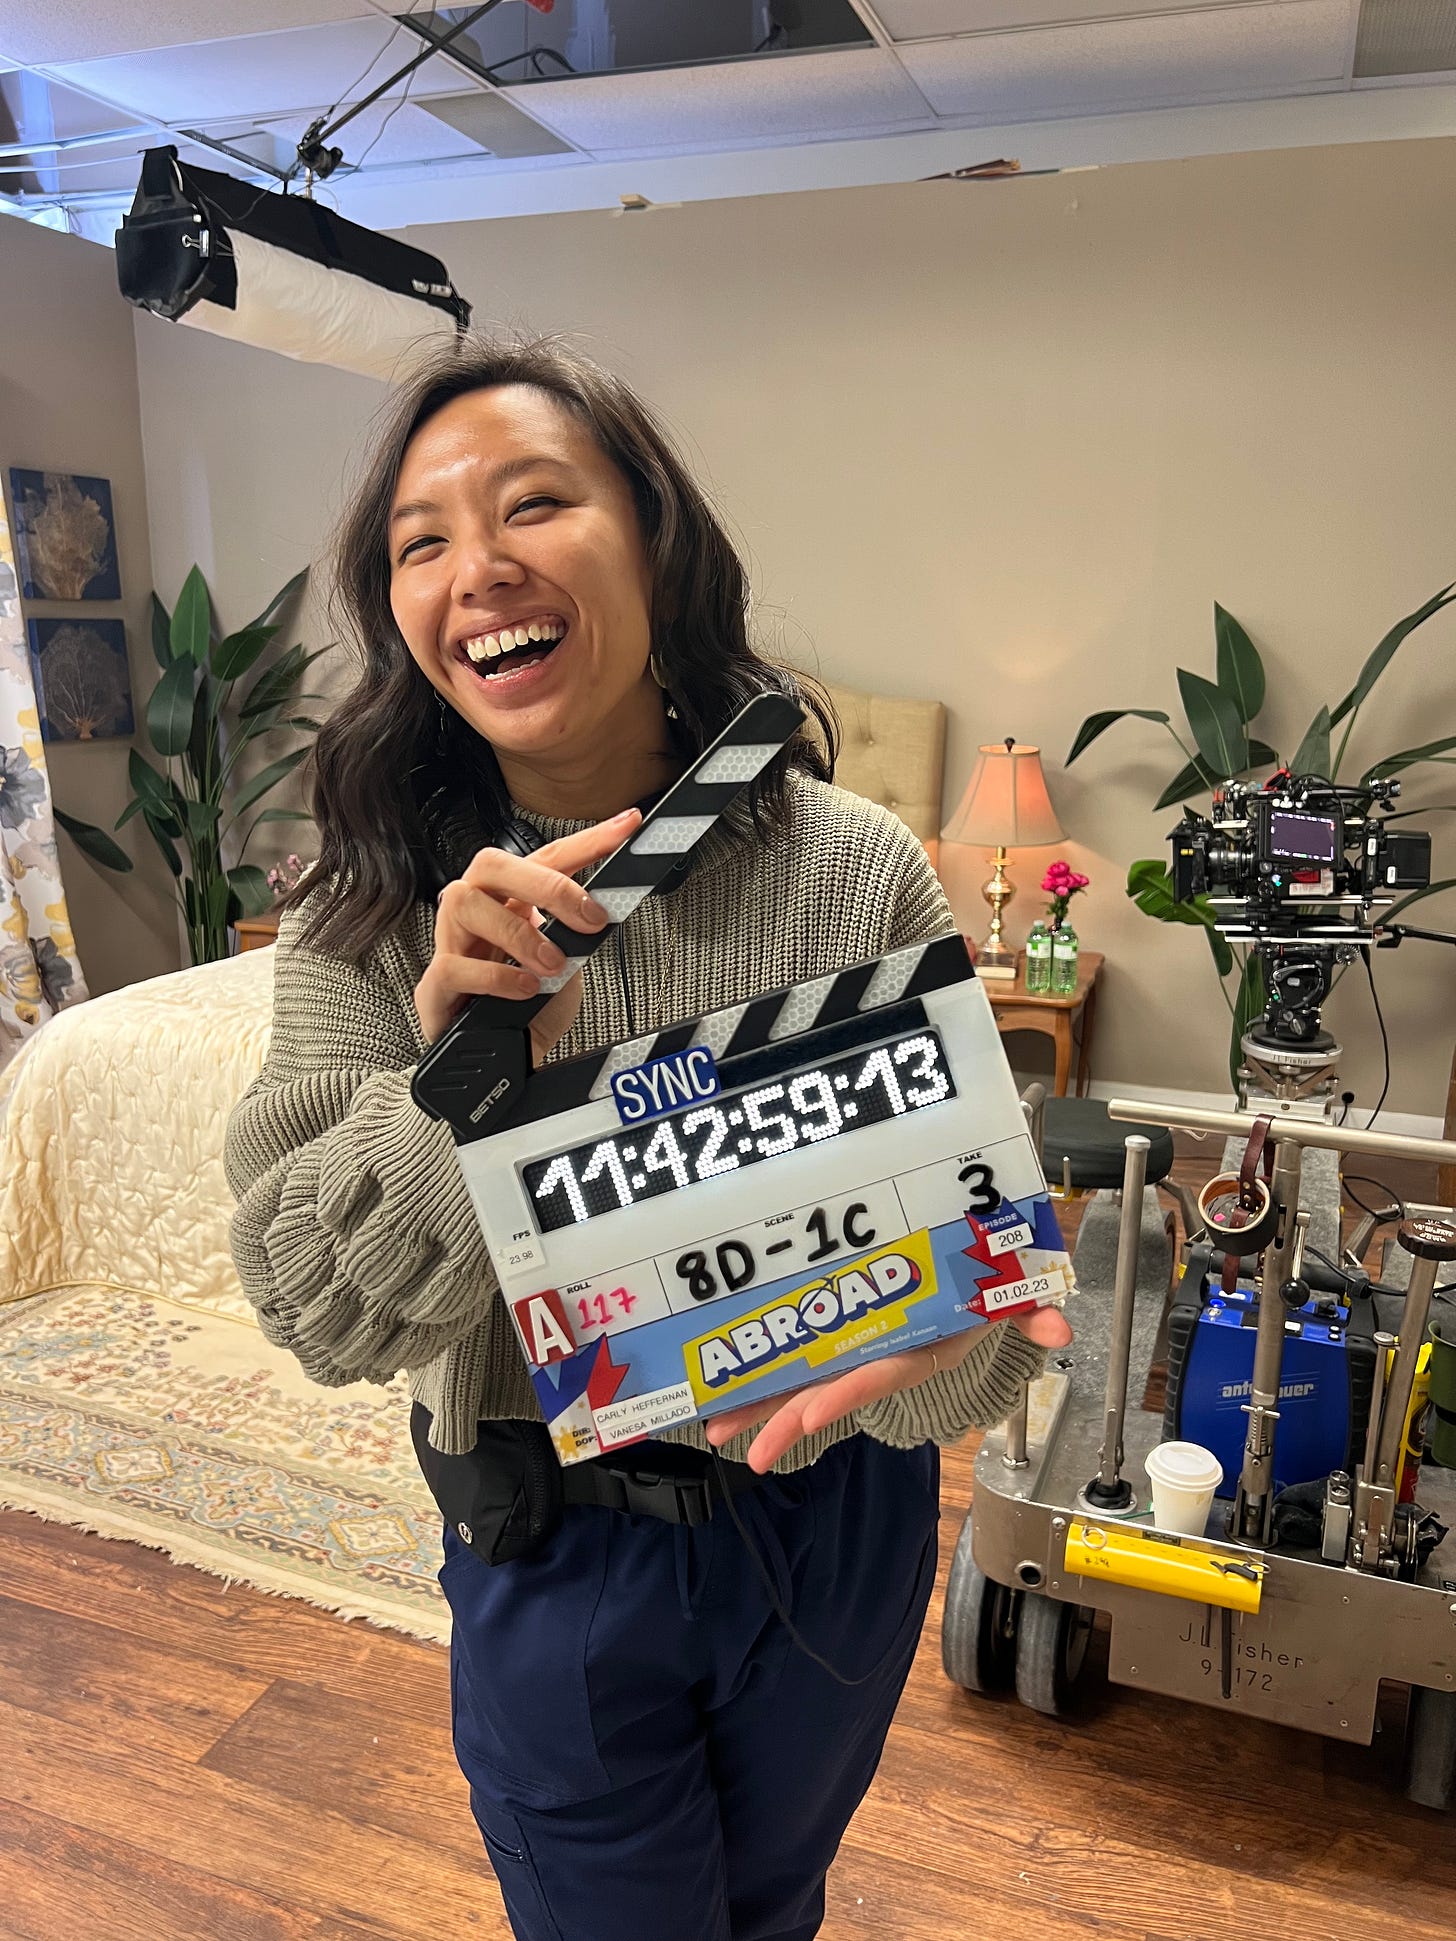 Justine standing on set of a TV show holding a clapper that says ABROAD. There is a couch and camera behind her.